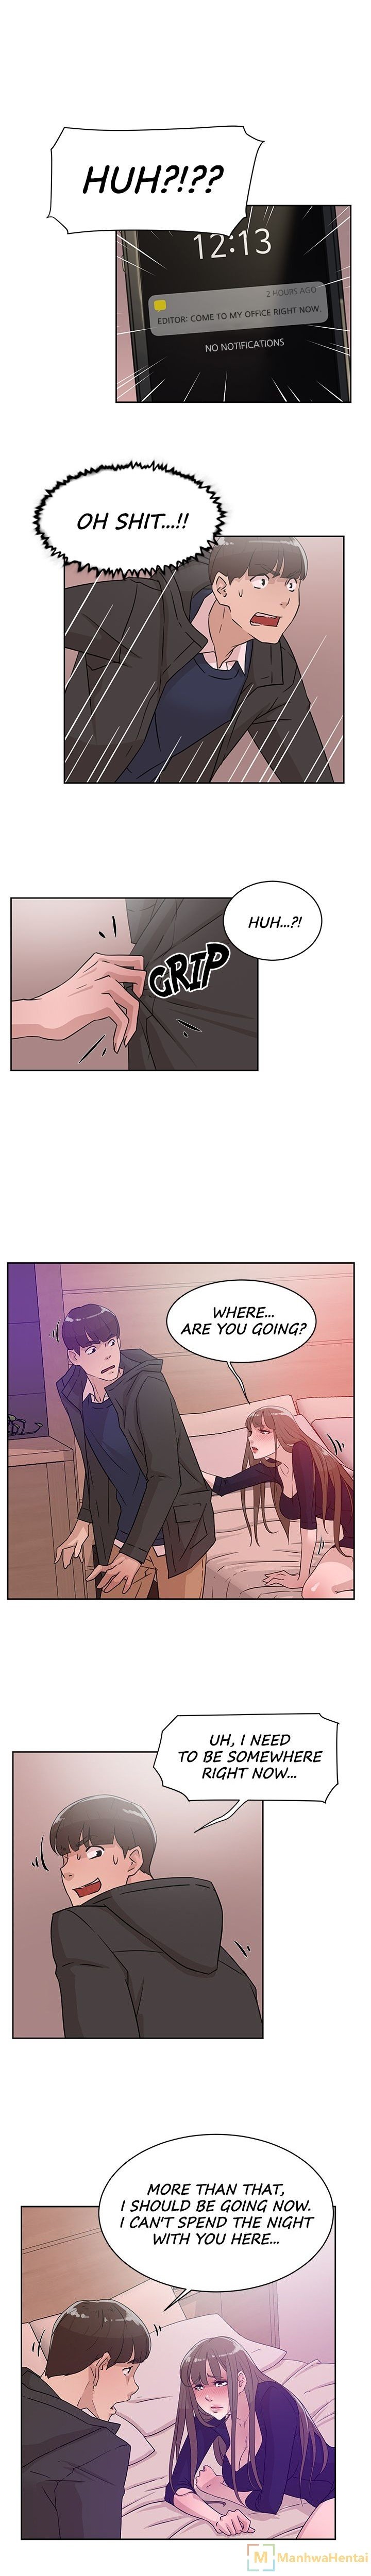 office-affairs-chap-31-12